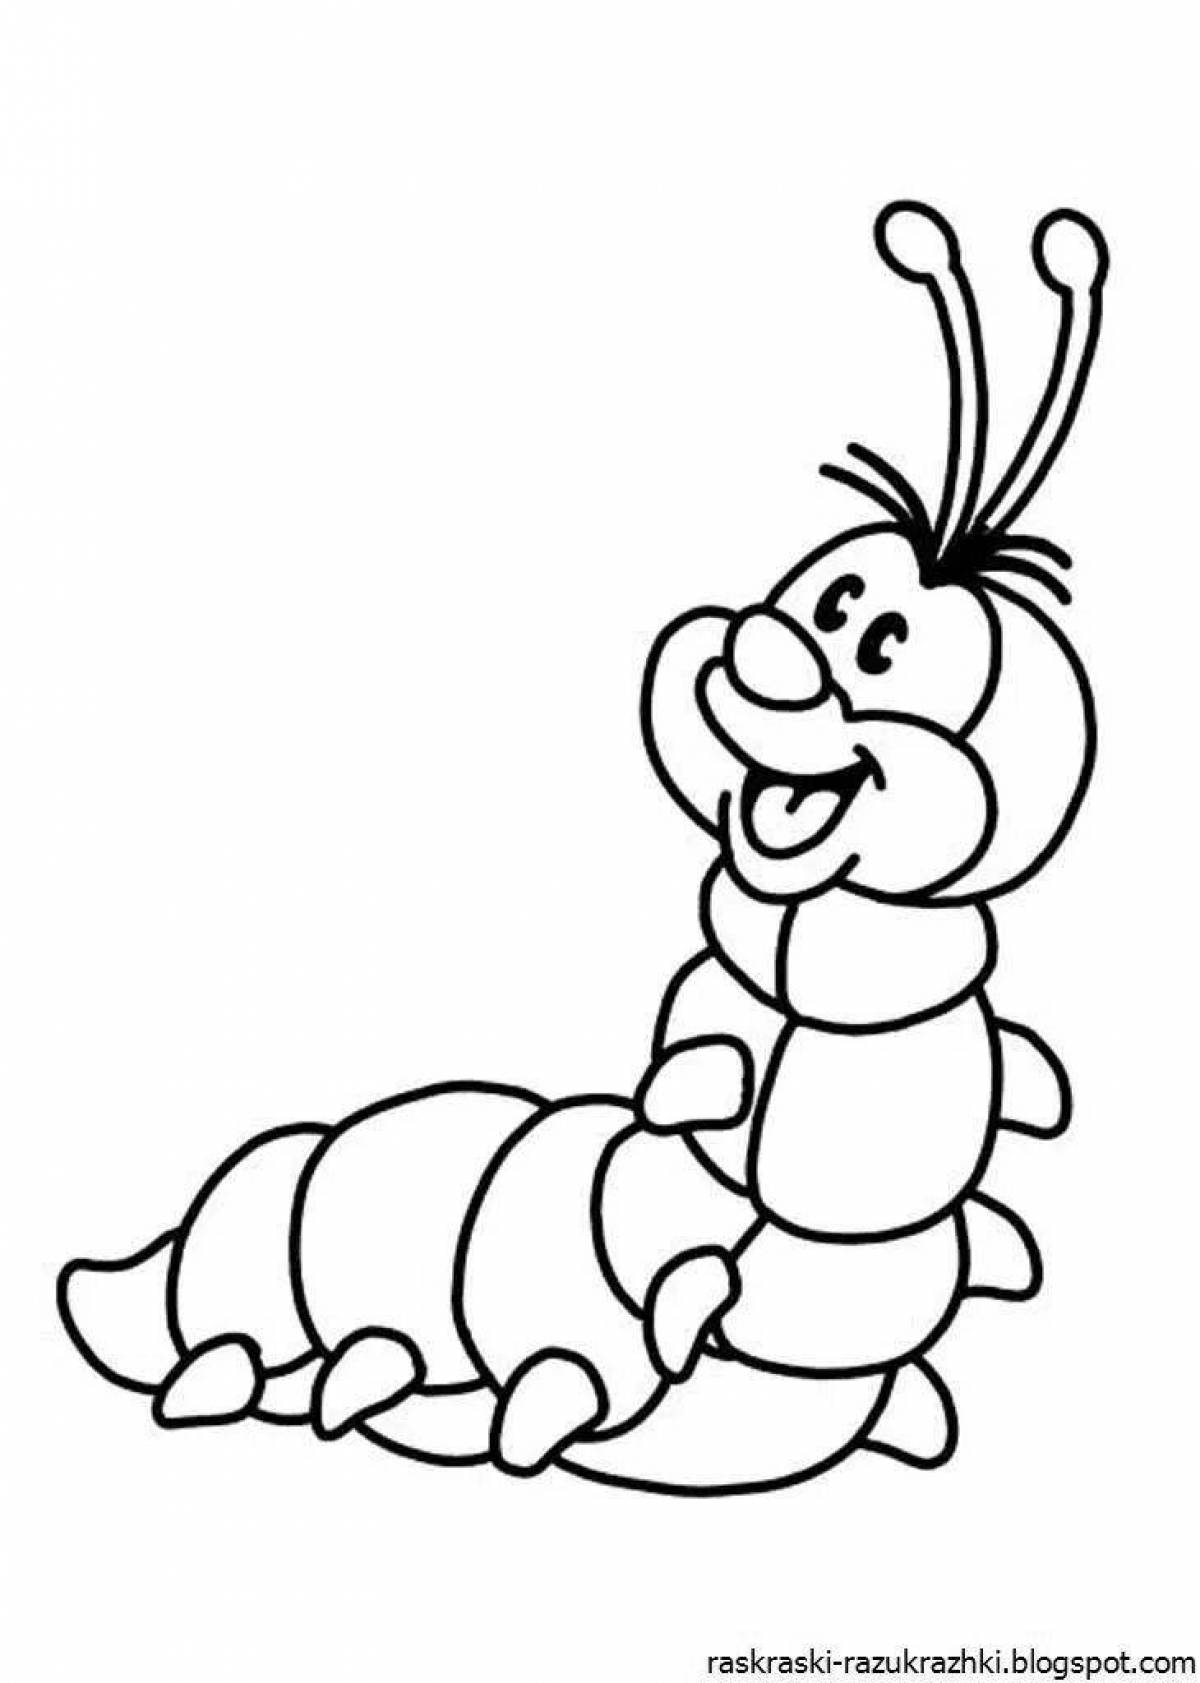 Playful insect coloring page for 4-5 year olds